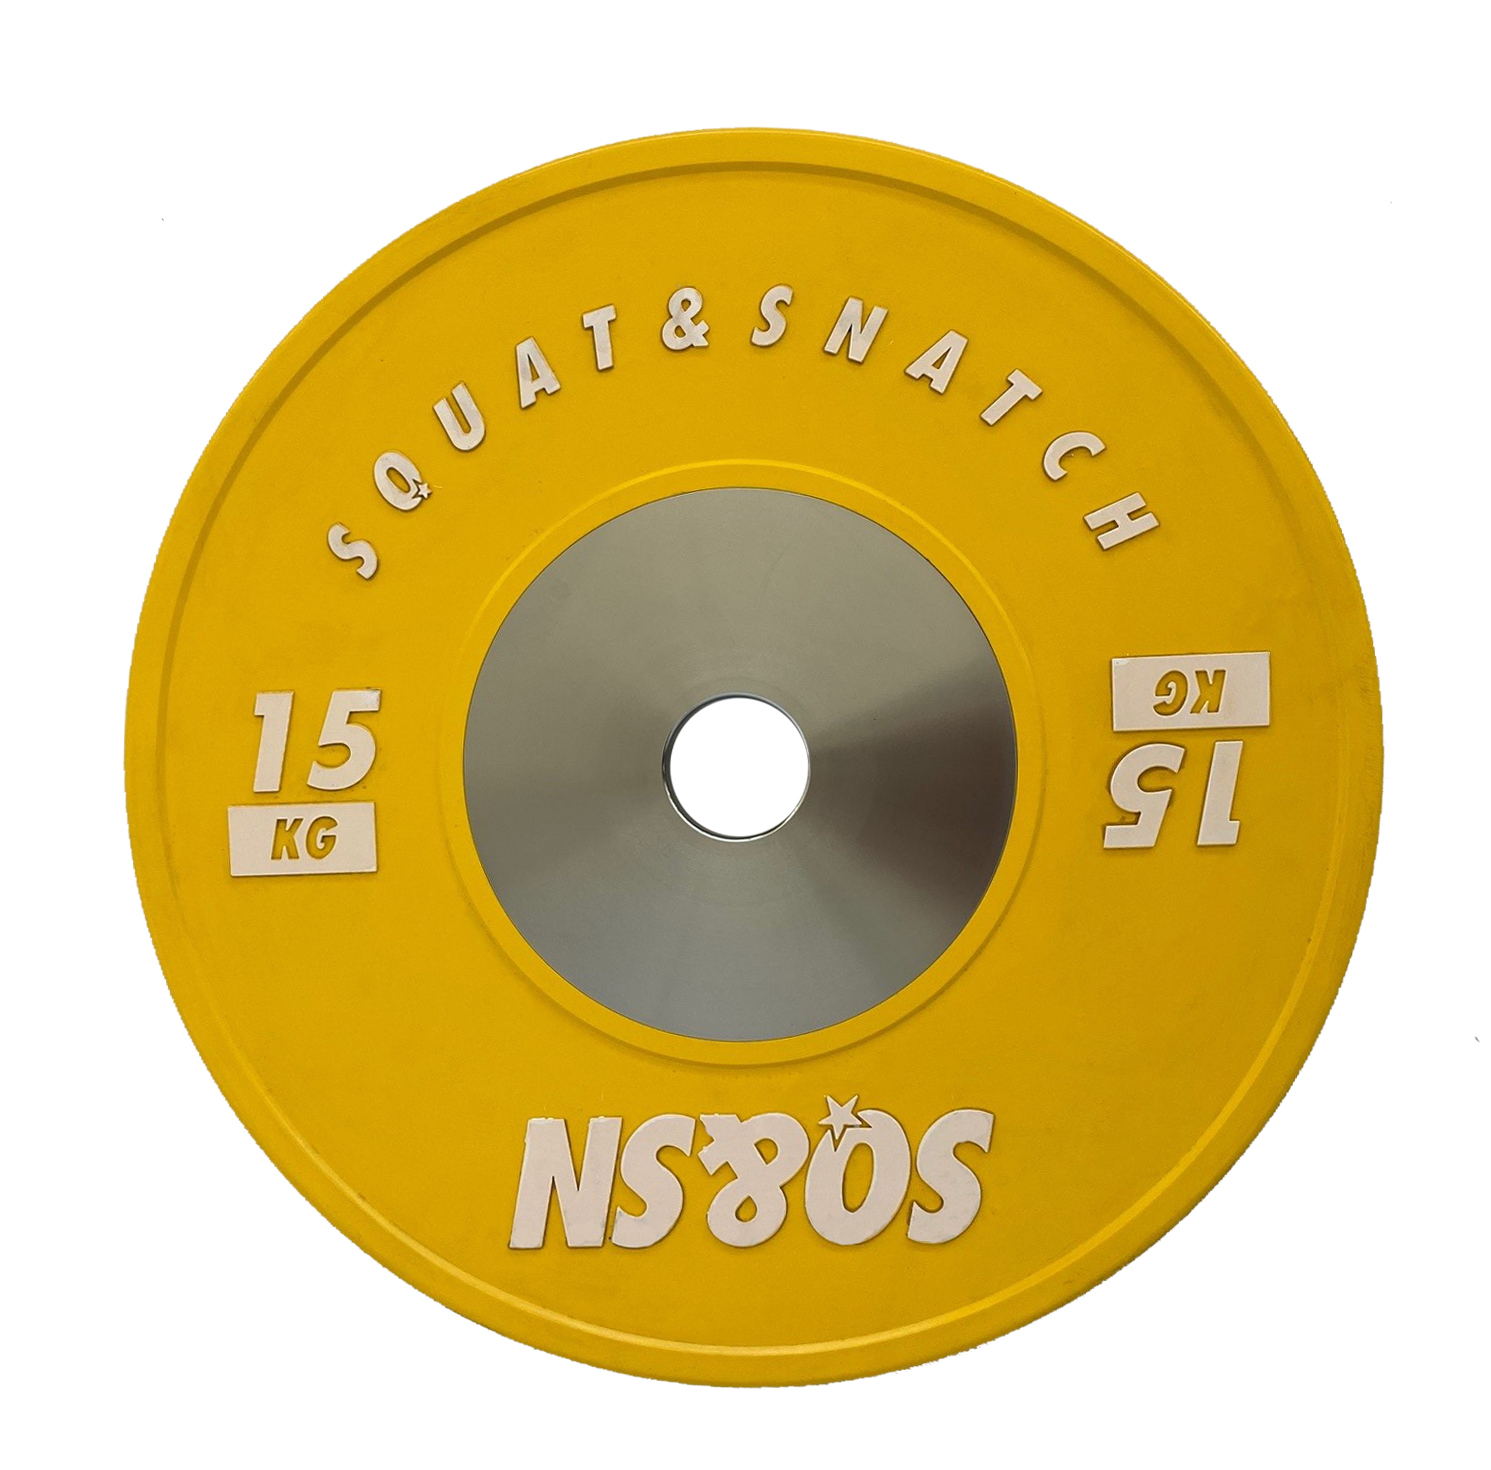 SQ&amp;SN Competition Bumper Plate 15 kg Yellow - Demo